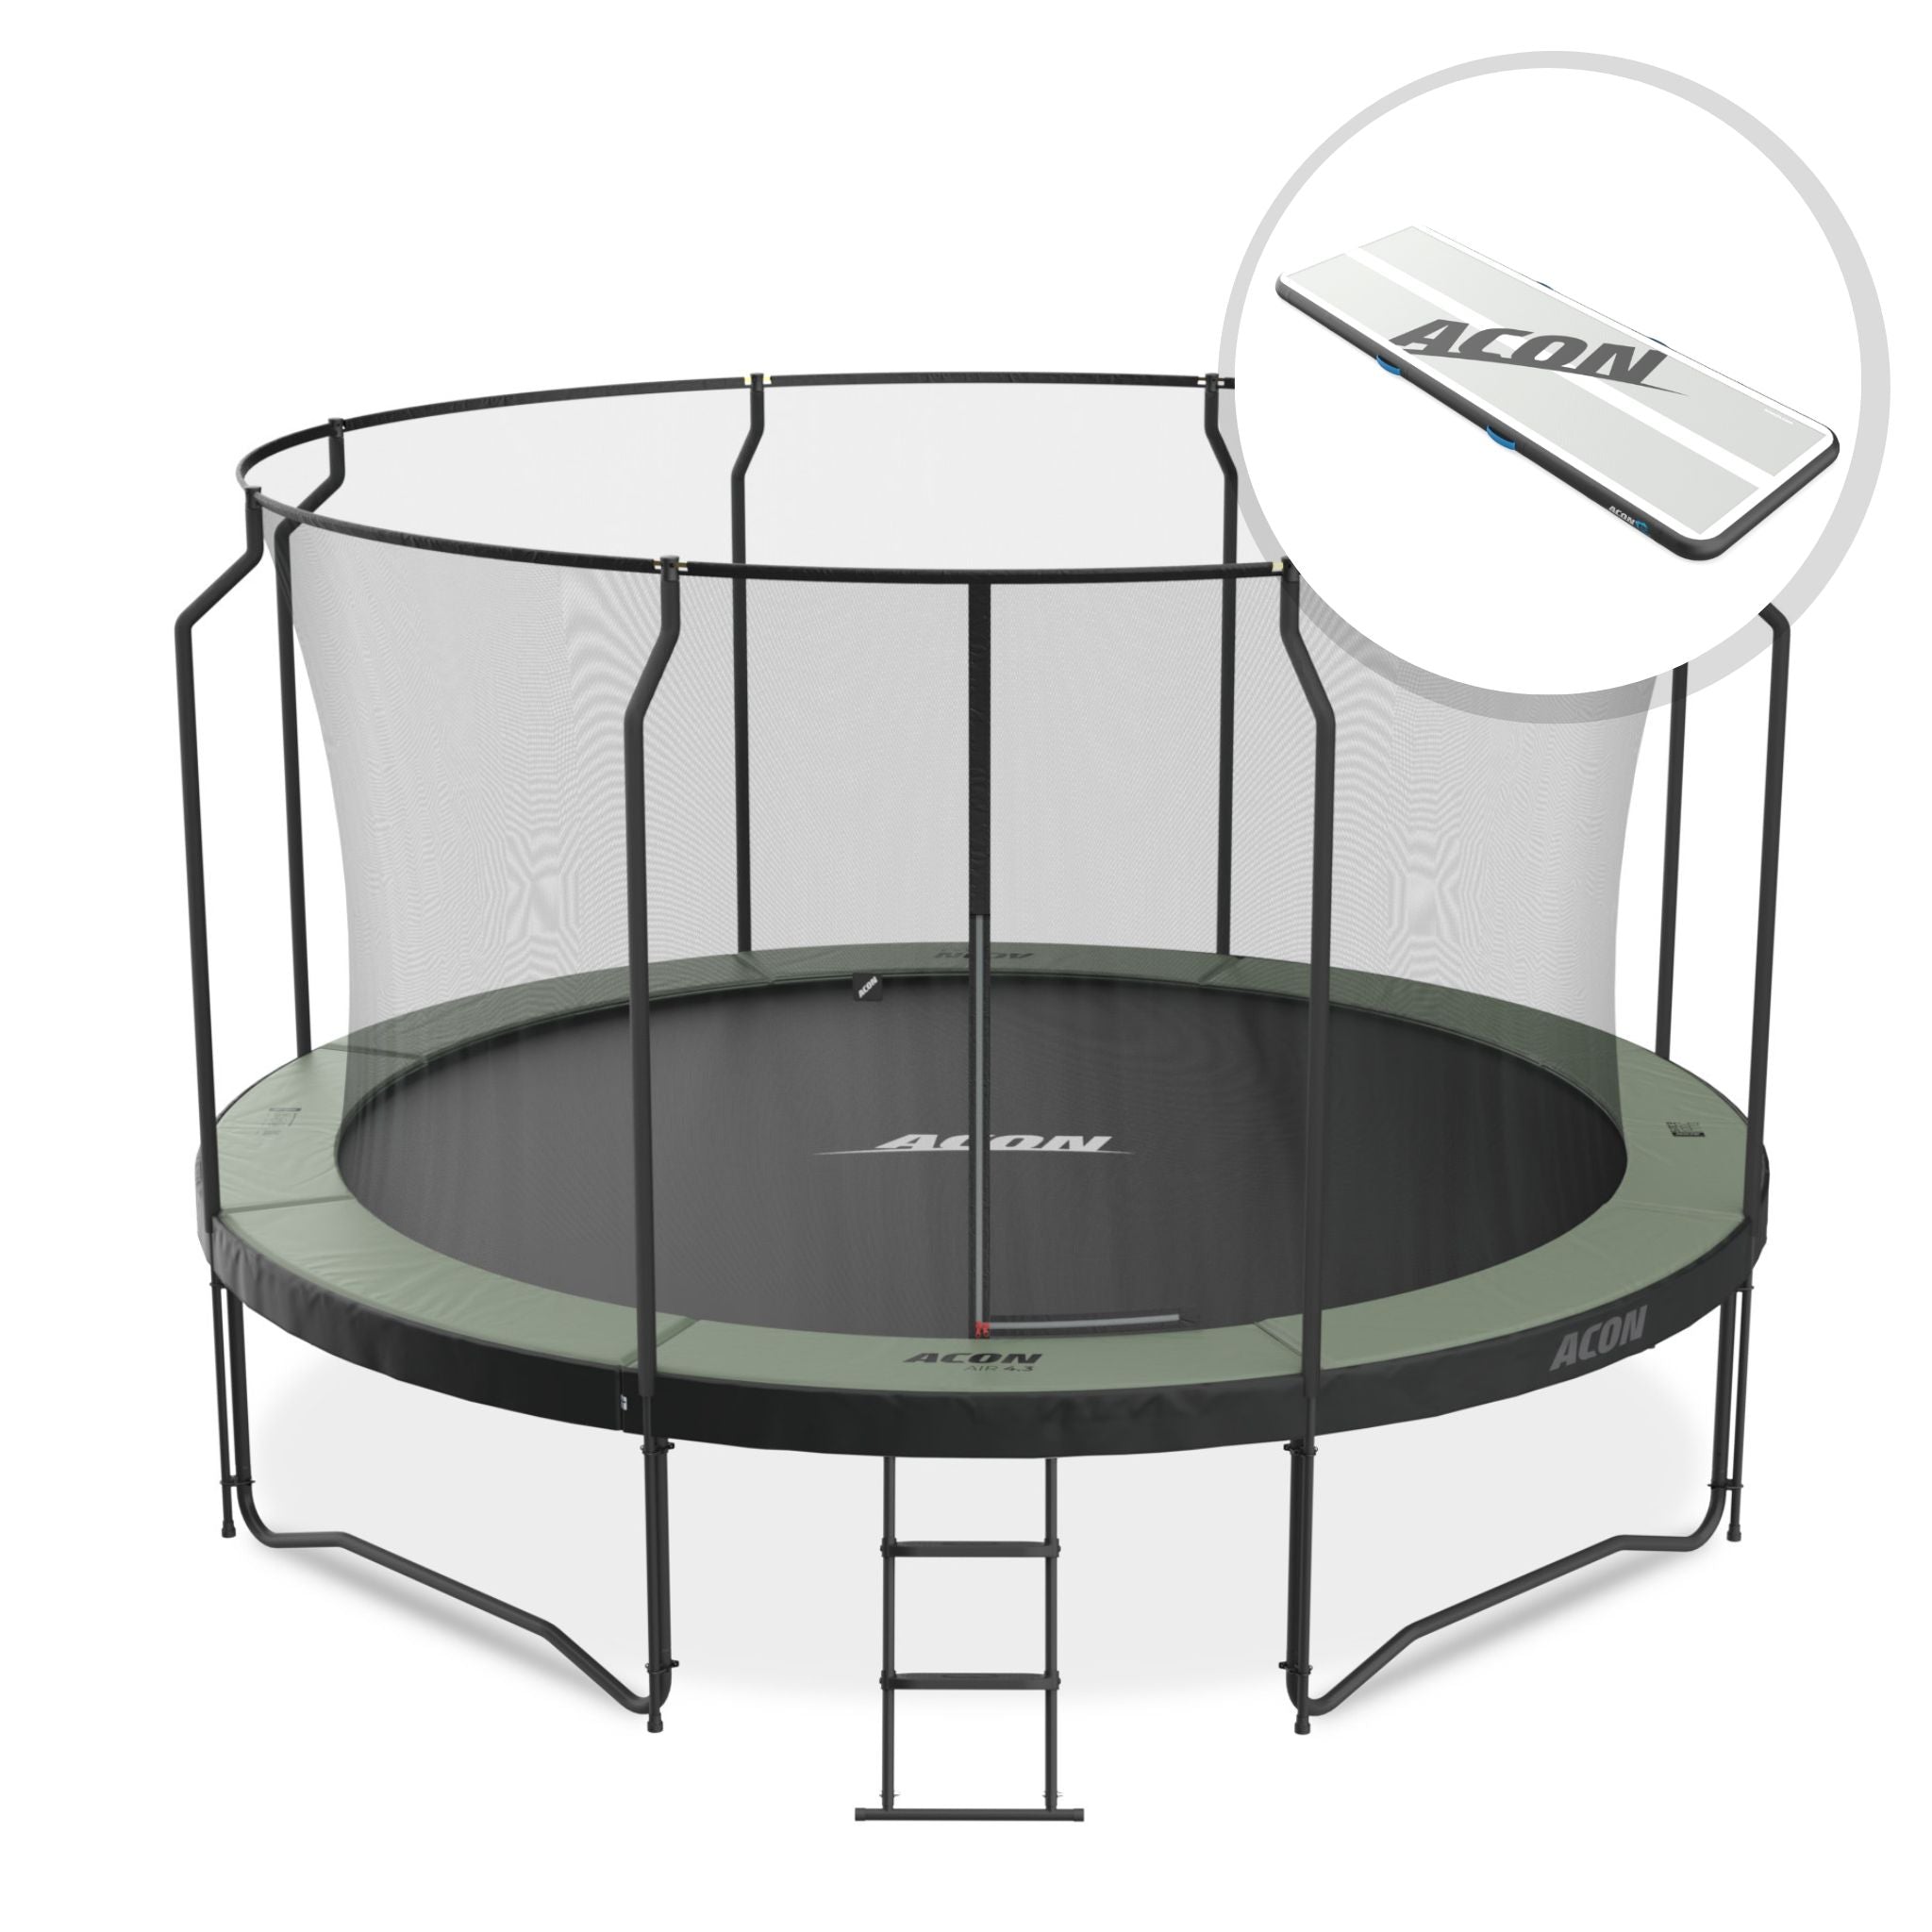 Product image of Acon15ft Round trampoline with Premium net, along with an inset round image of an Acon 10ft airtrack.